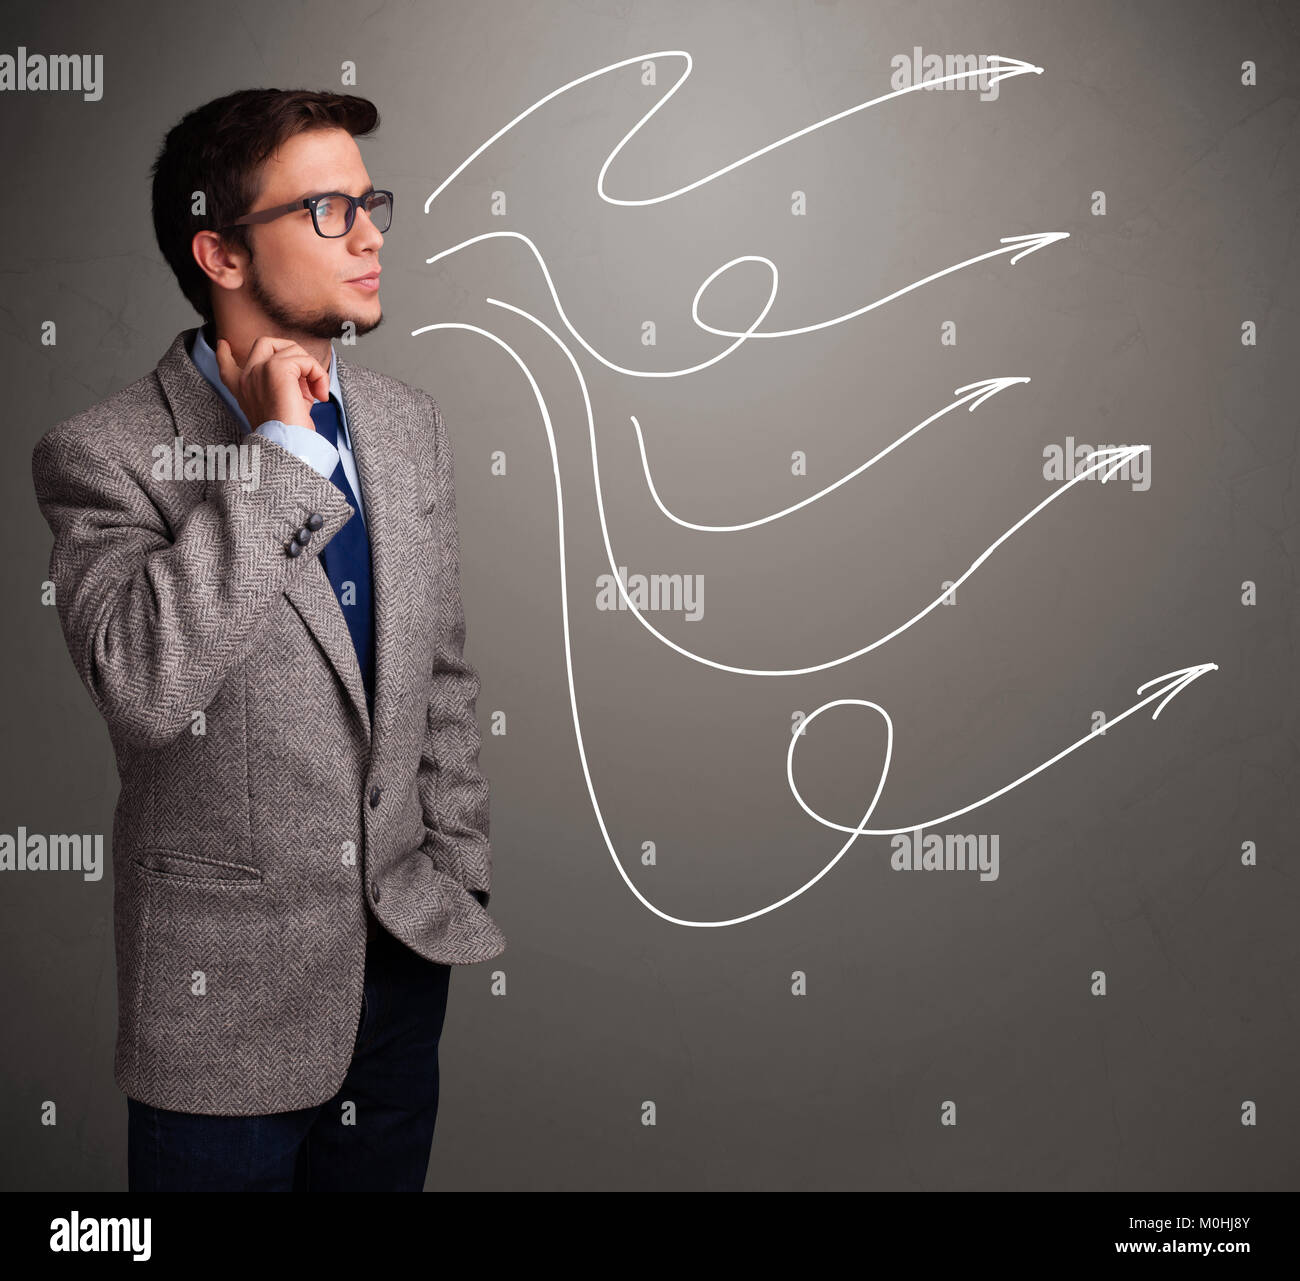 Attractive young man looking at multiple curly arrows Stock Photo